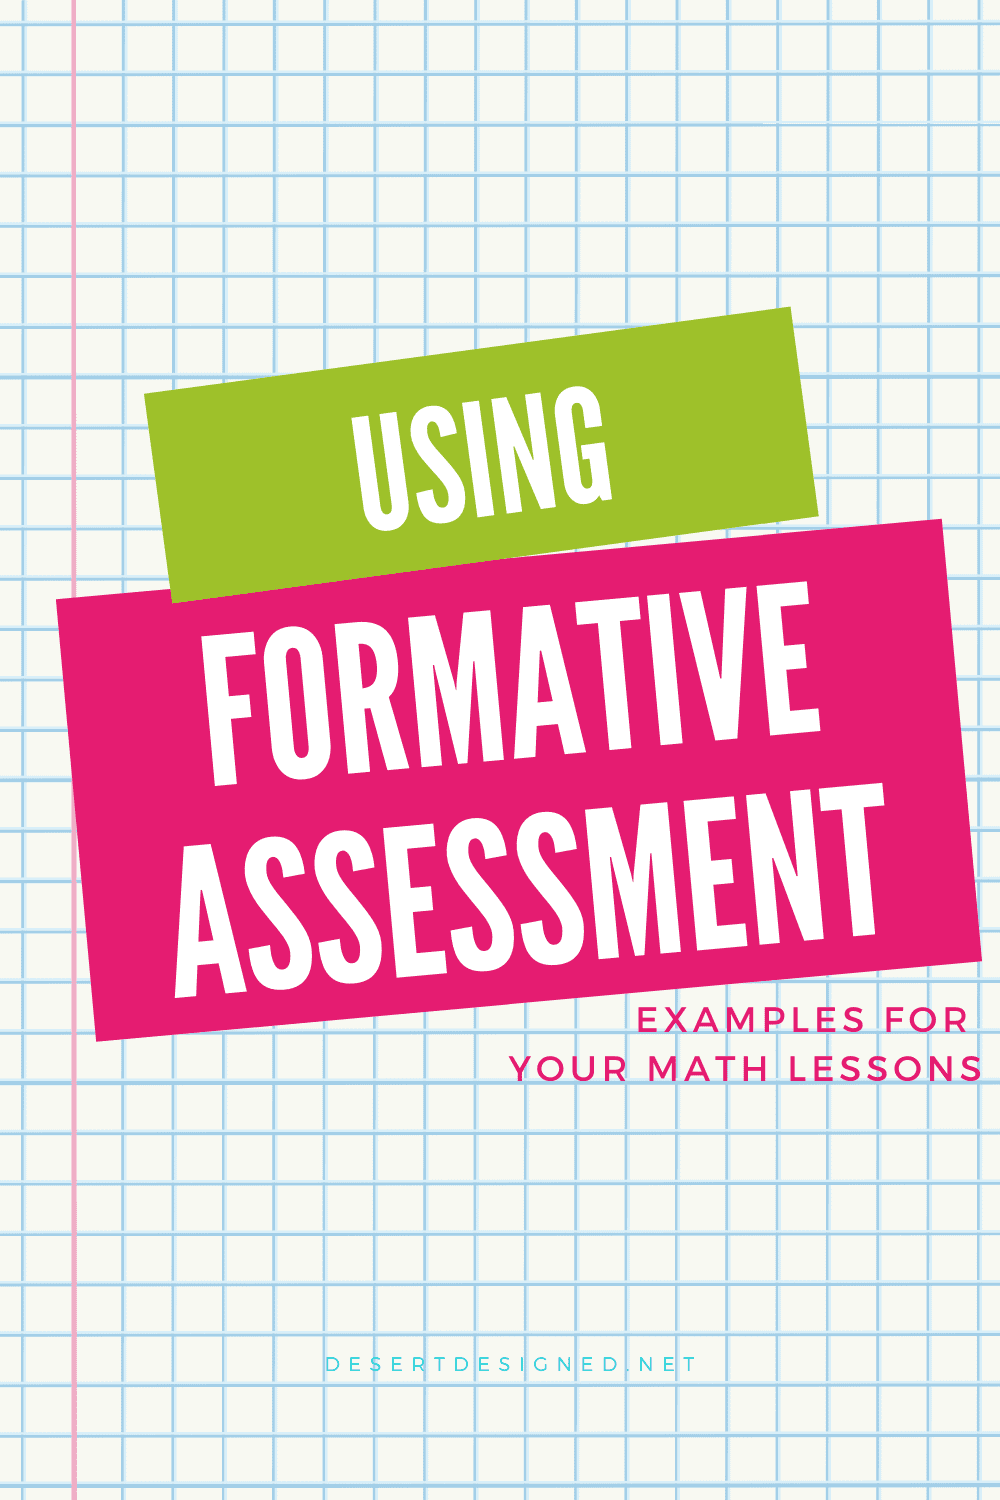 formative assessment discussion